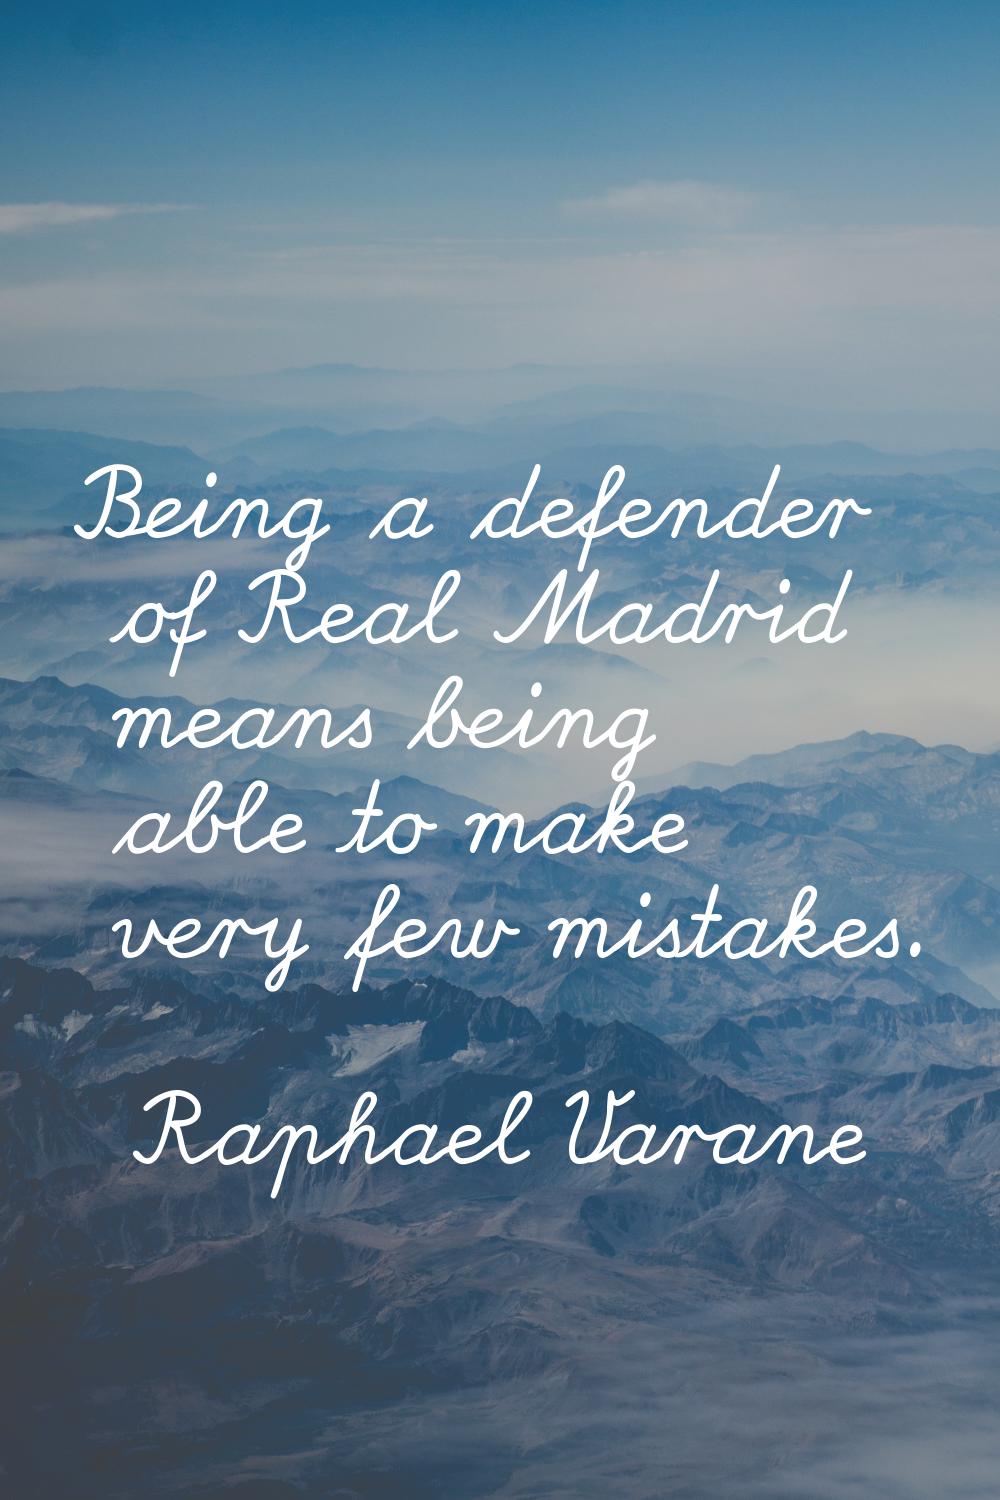 Being a defender of Real Madrid means being able to make very few mistakes.